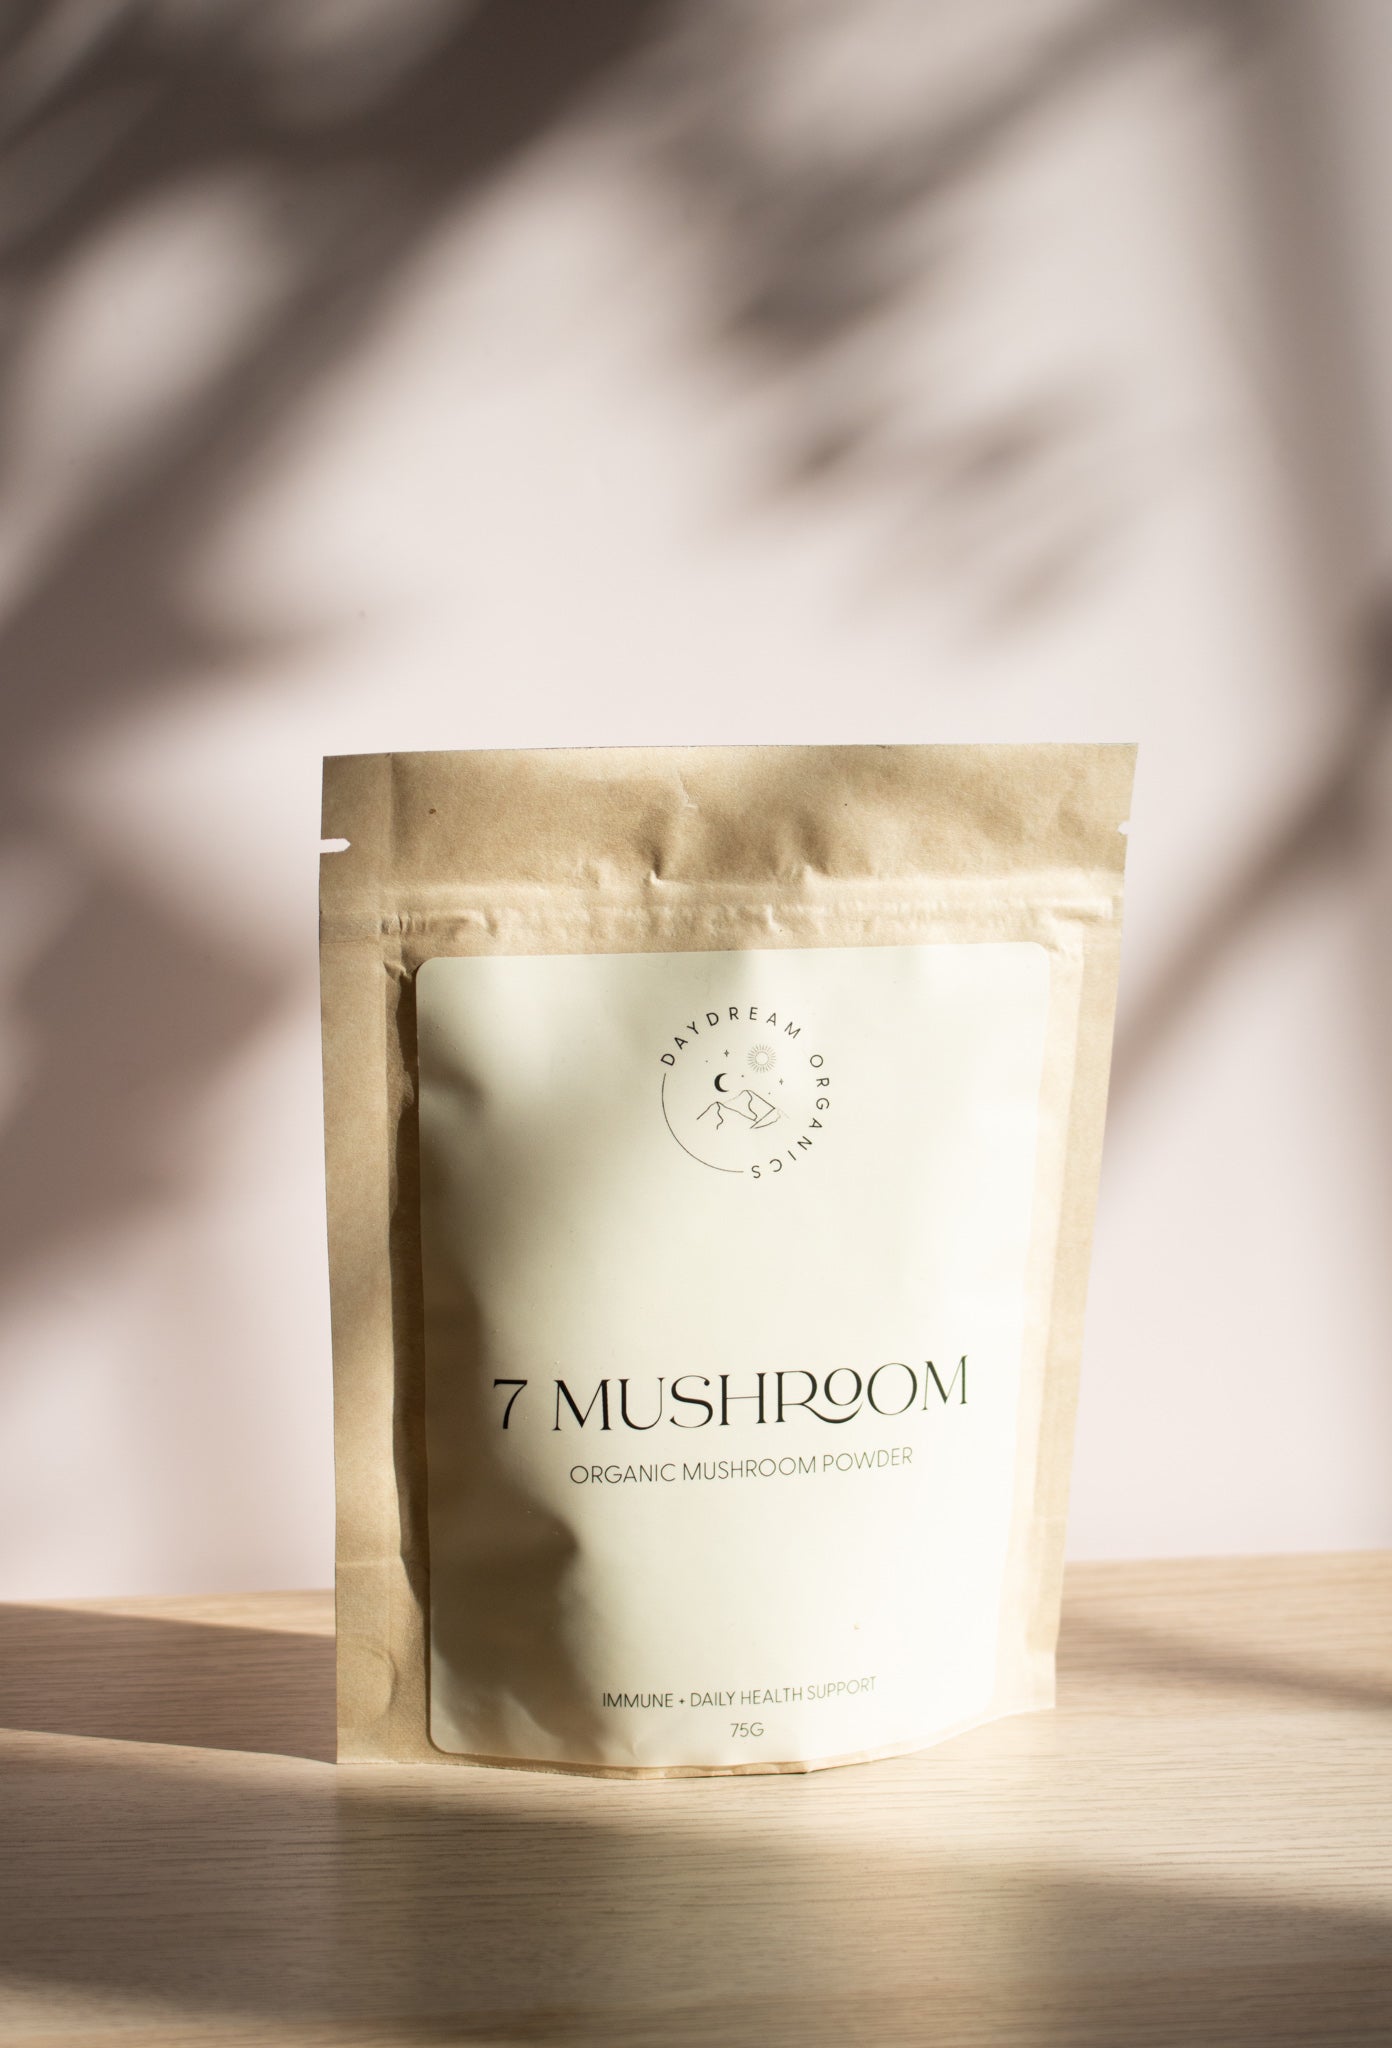 Our organic 7 Mushroom blend powder can be used as a source of antioxidants and to strengthen and modulate the immune system enhancing overall, daily health and wellbeing. 